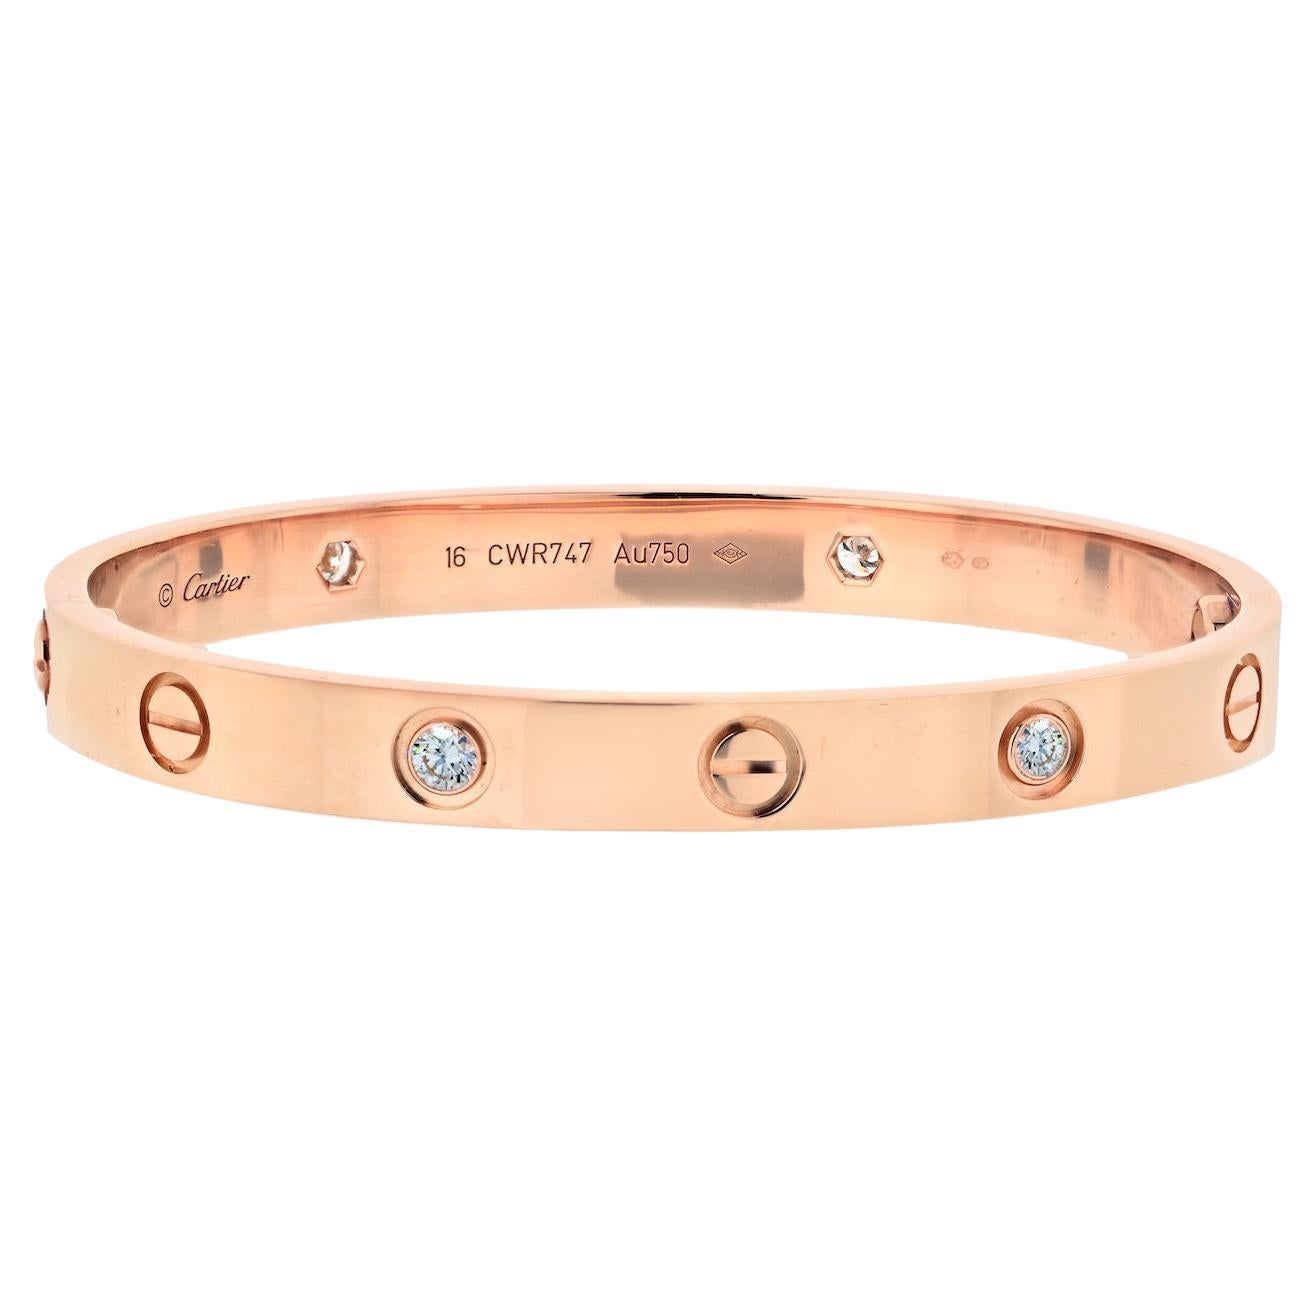 How many diamonds are in a Cartier Love bracelet?